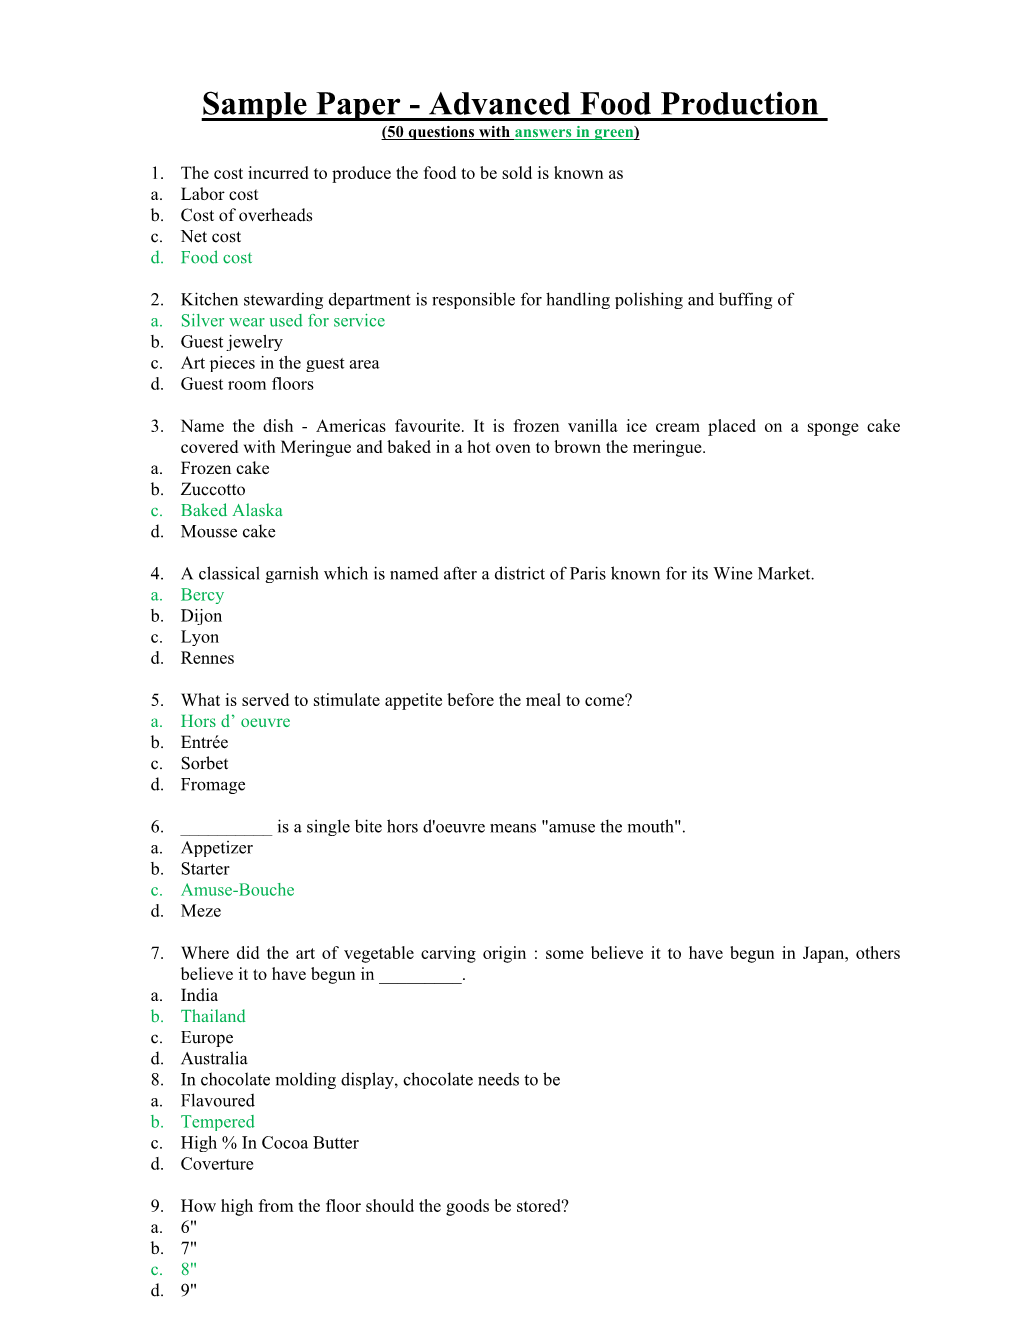 Sample Paper - Advanced Food Production (50 Questions with Answers in Green)